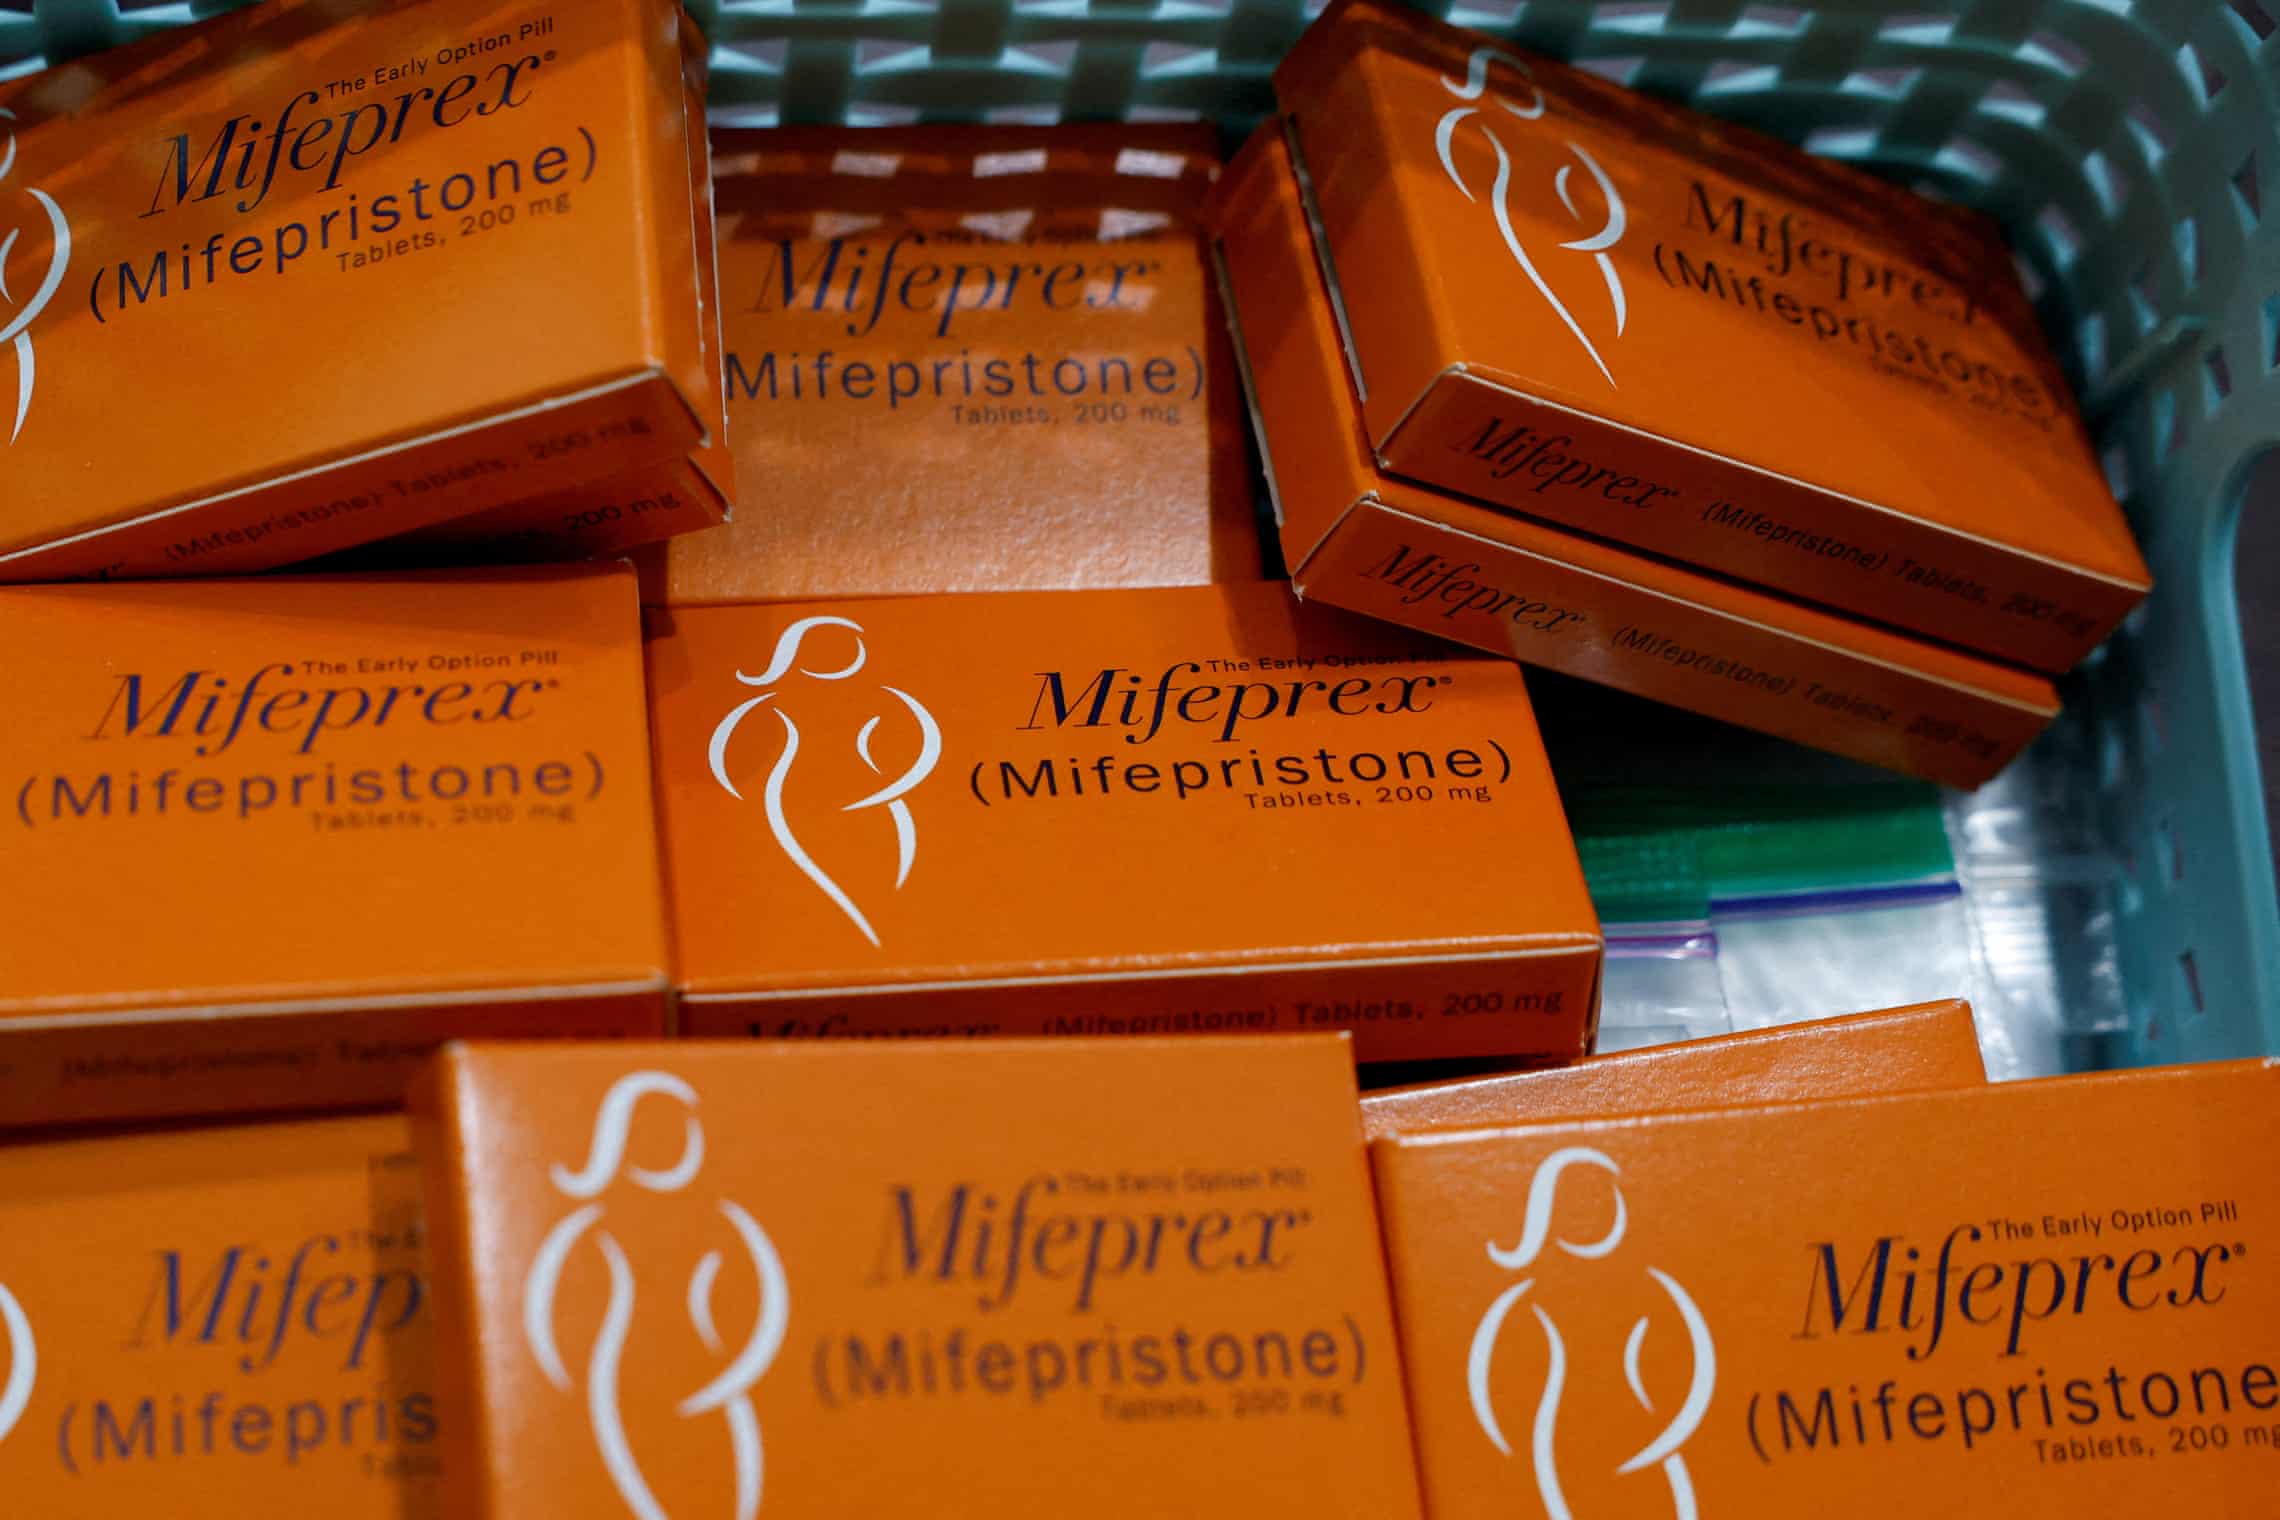 New laws allow access to abortion pills in US